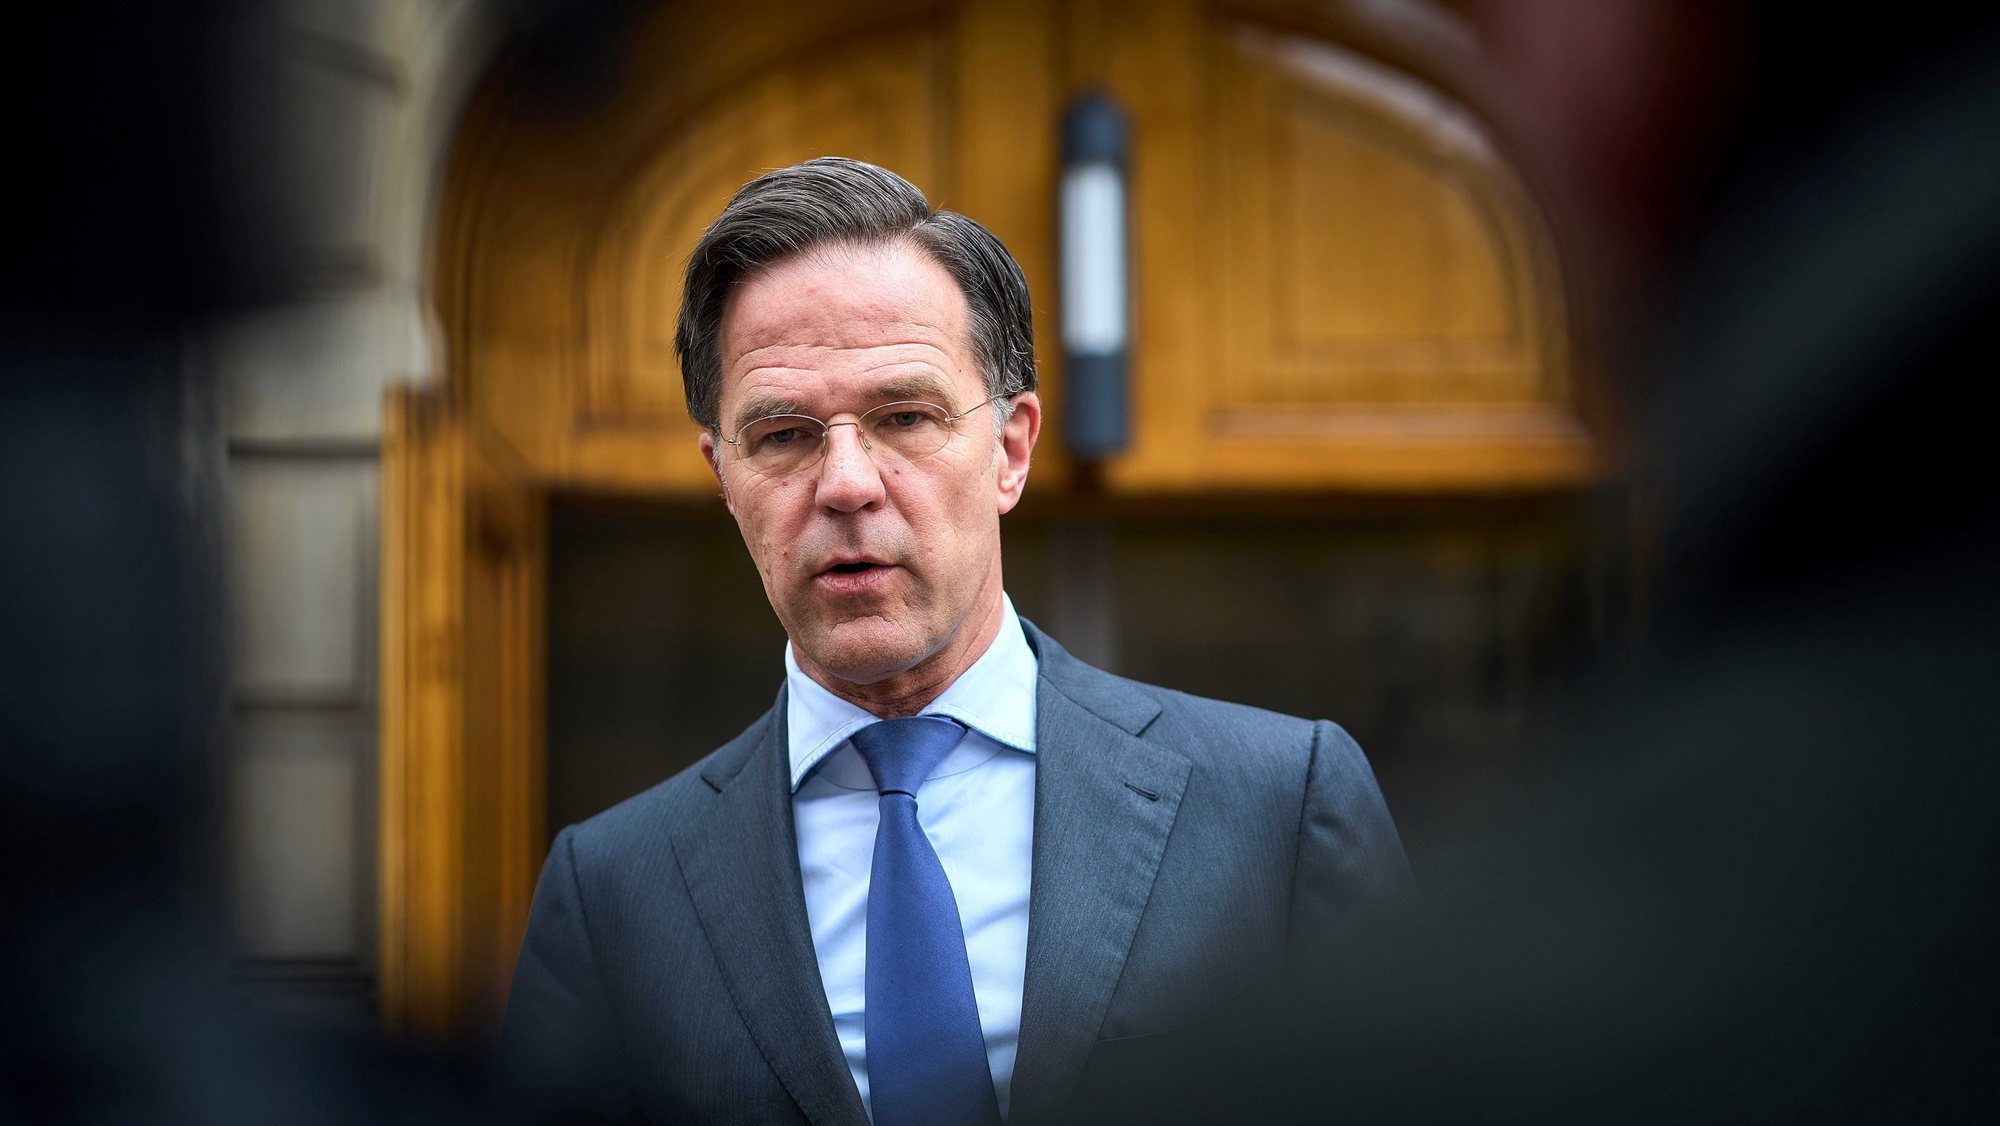 epa09776618 Dutch Prime Minister Mark Rutte addresses the press in The Hague, Netherlands, 22 February 2022. Russian President Vladimir Putin announced the recognition of the self-proclaimed Donetsk People&#039;s Republic (DPR) and the Luhansk People&#039;s Republic (LPR).  EPA/Phil nijhuis